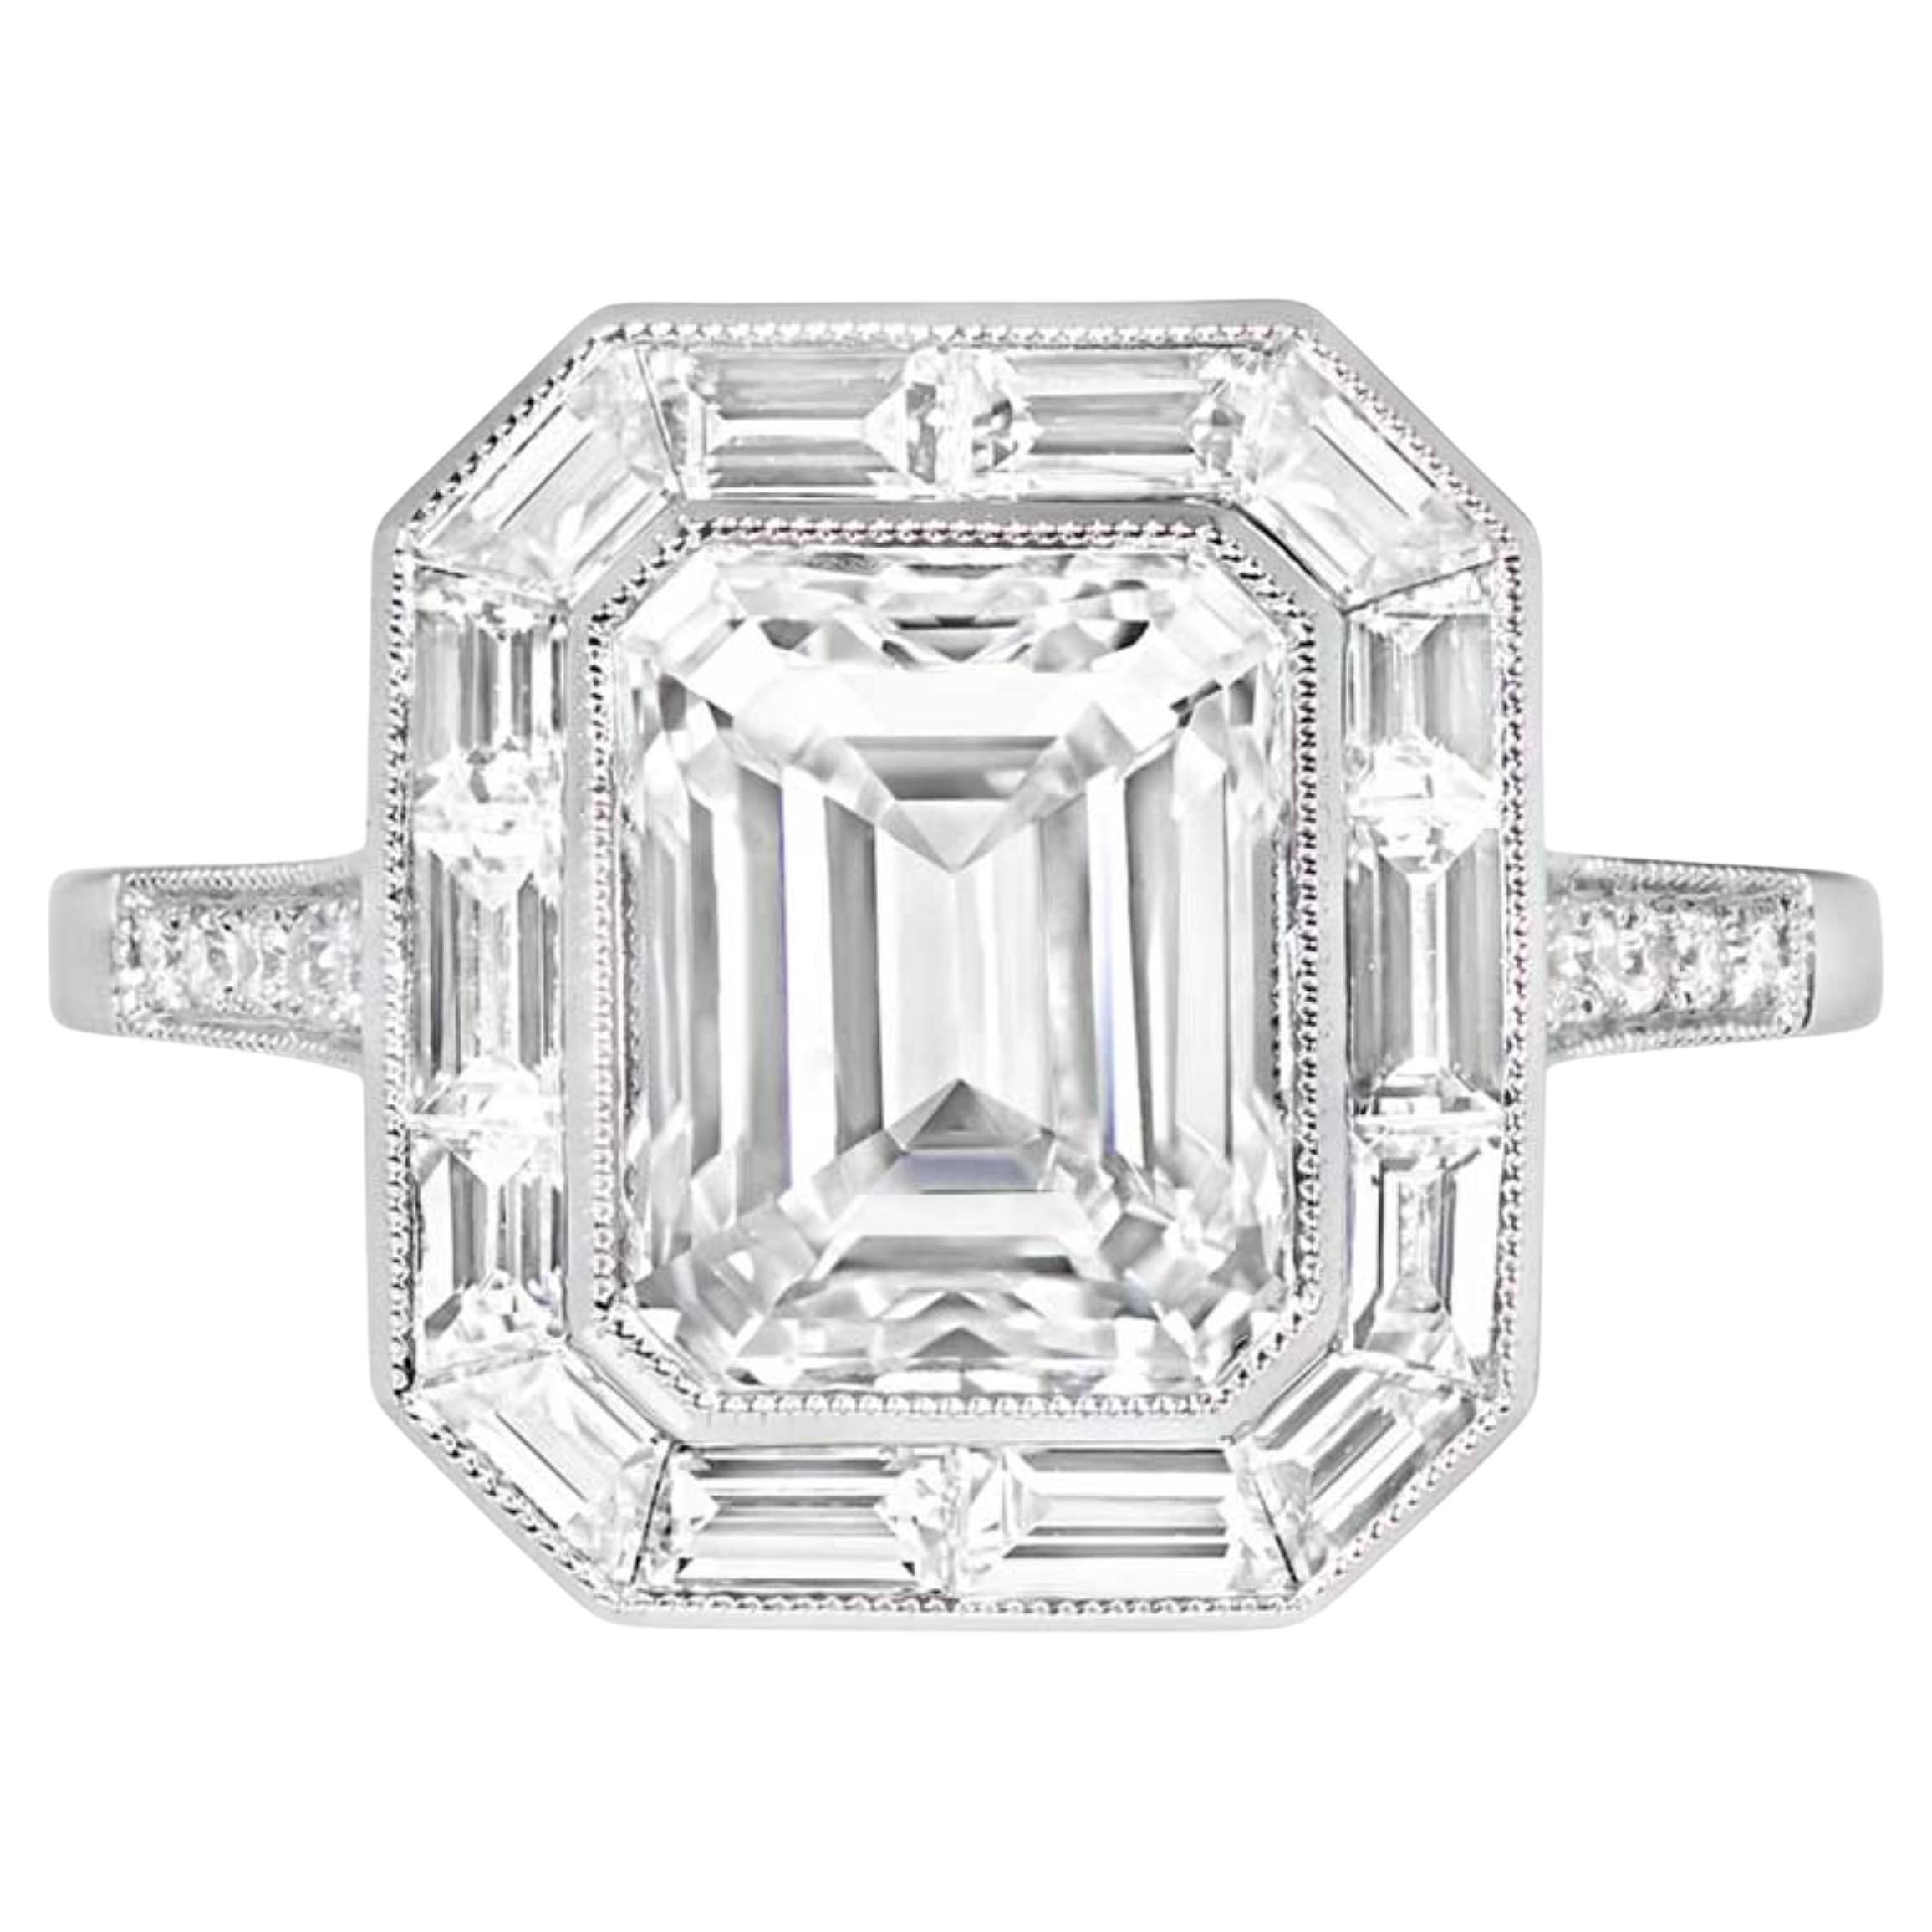 GIA Certified 2.40 Carat VVS1 Clarity Diamond Engagement Ring in Platinum For Sale